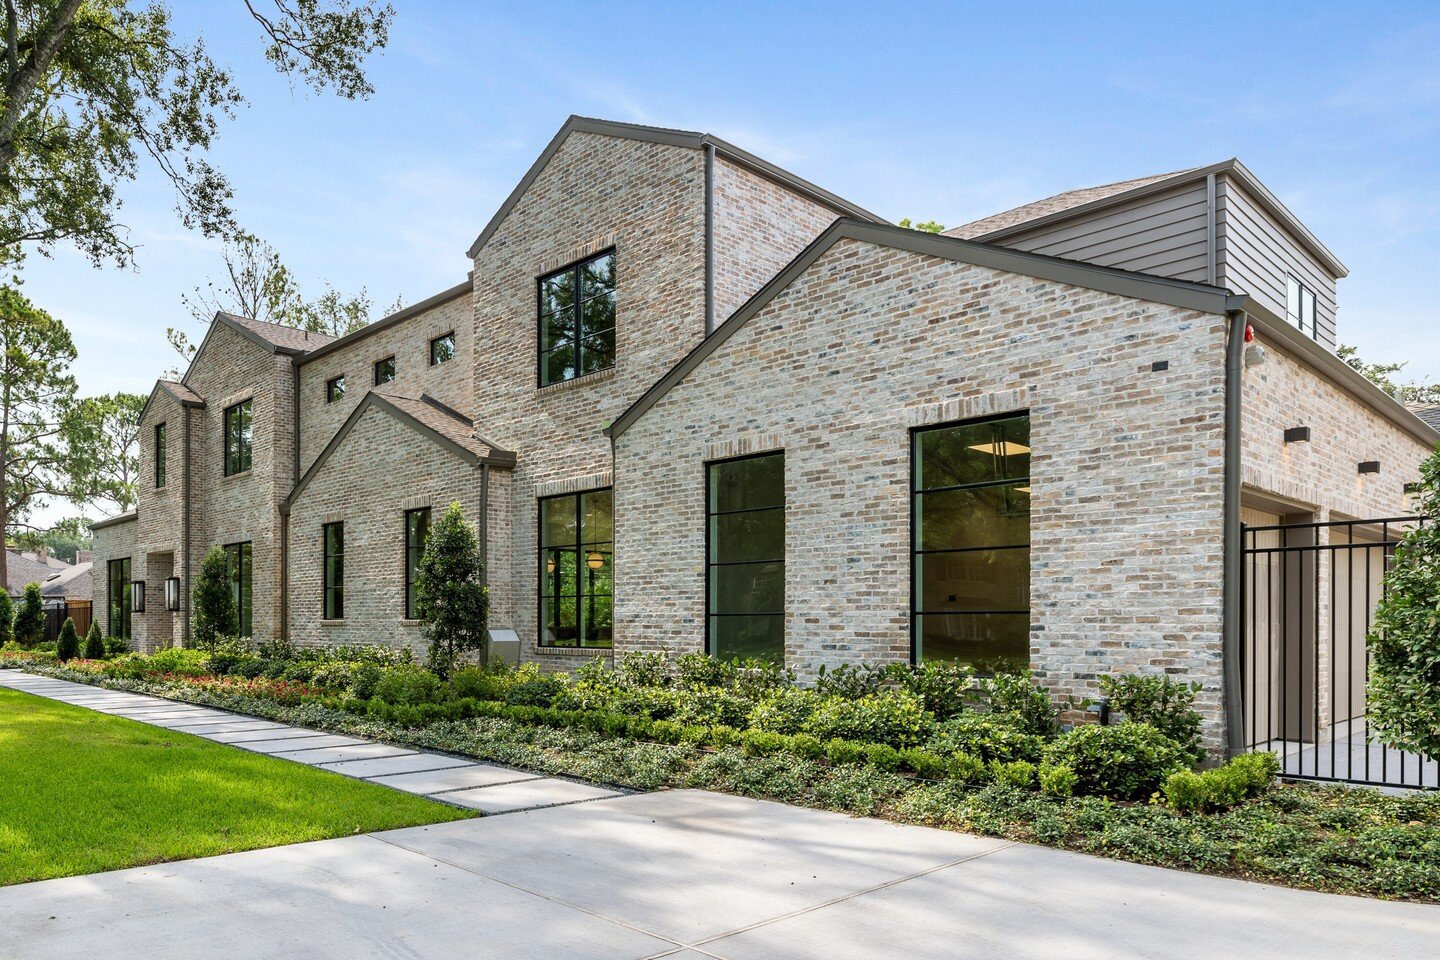 Just SOLD 11315 Coloma Lane!!! Congratulations to the buyers! 🎉🏡

Check out more pictures of this beautiful project on our website: www.concordbuilders.com.

#concord.builders #newconstructionhomes #customluxuryhome #houstonrealestate #houstontxhom